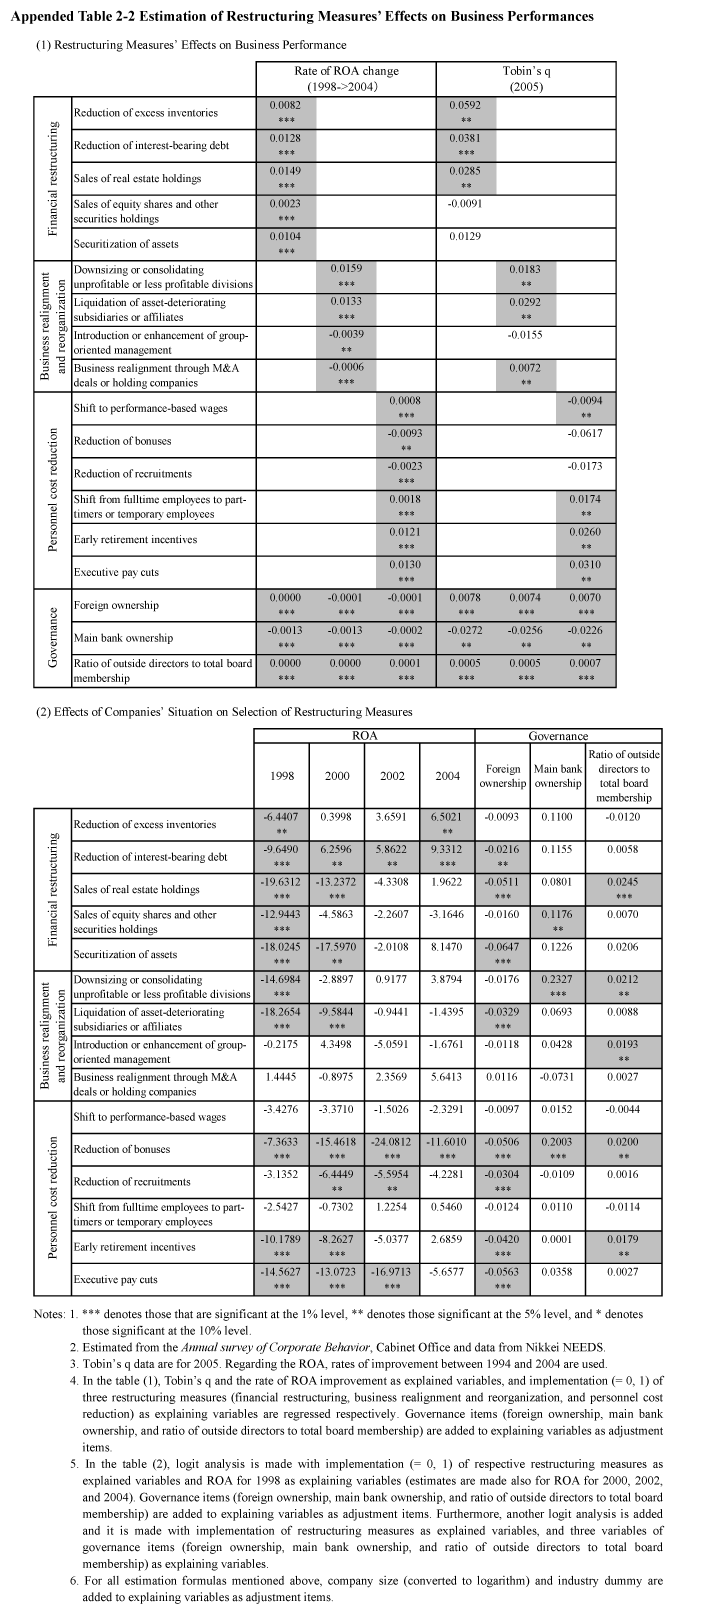 Appended Table 2-2 Estimation of Restructuring Measures' Effects on Business Performances